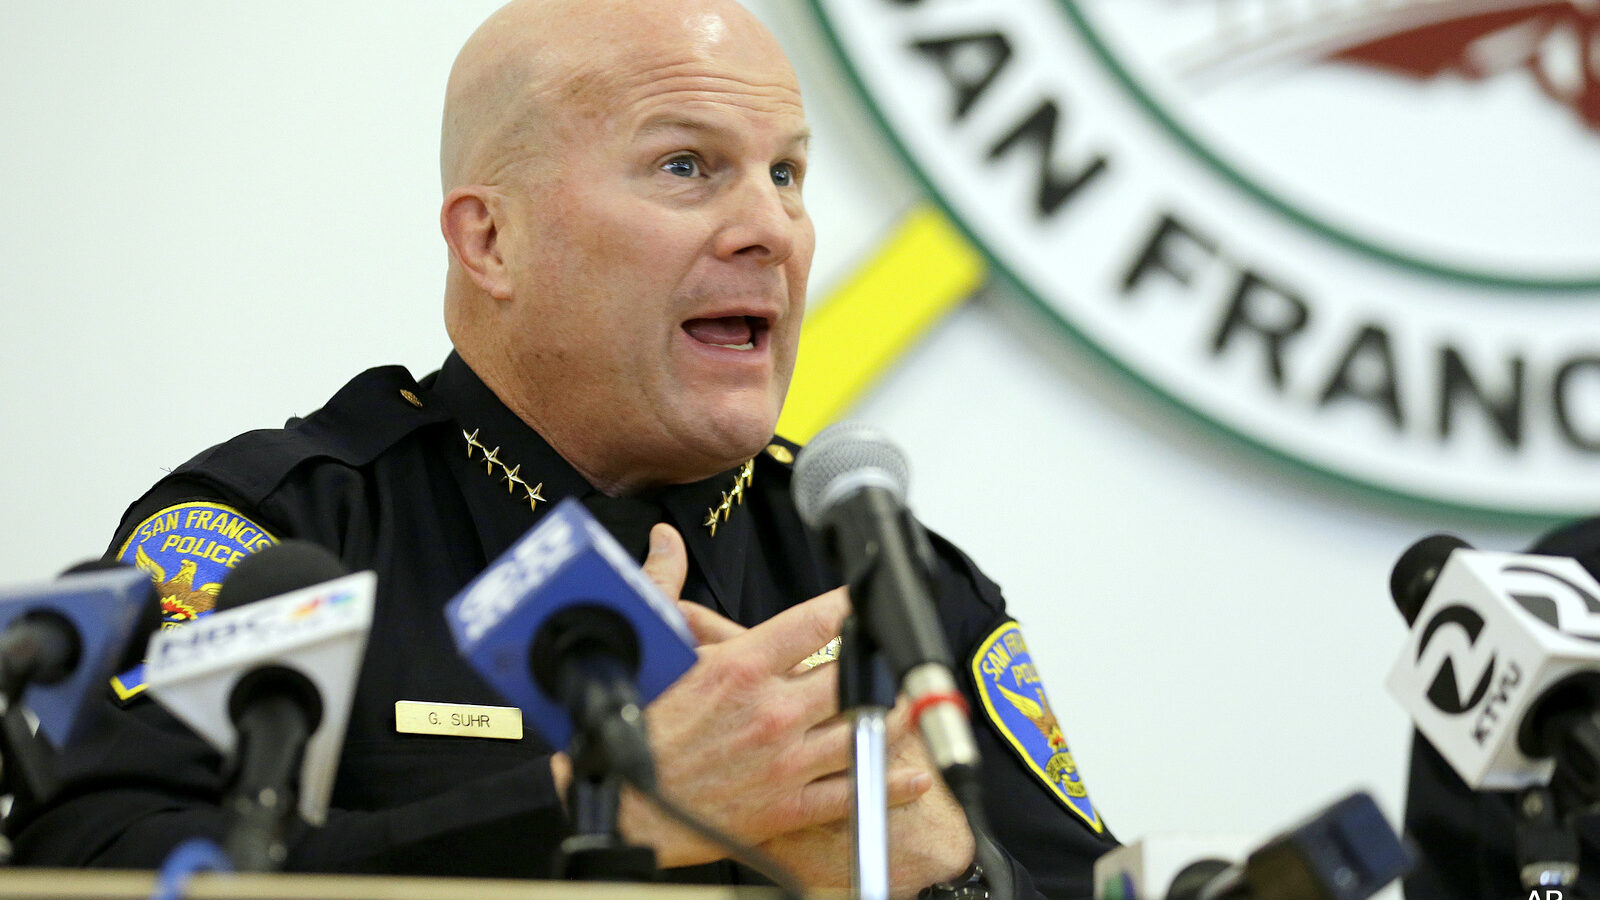 San Francisco police Chief Greg Suhr speaks during a town hall meeting